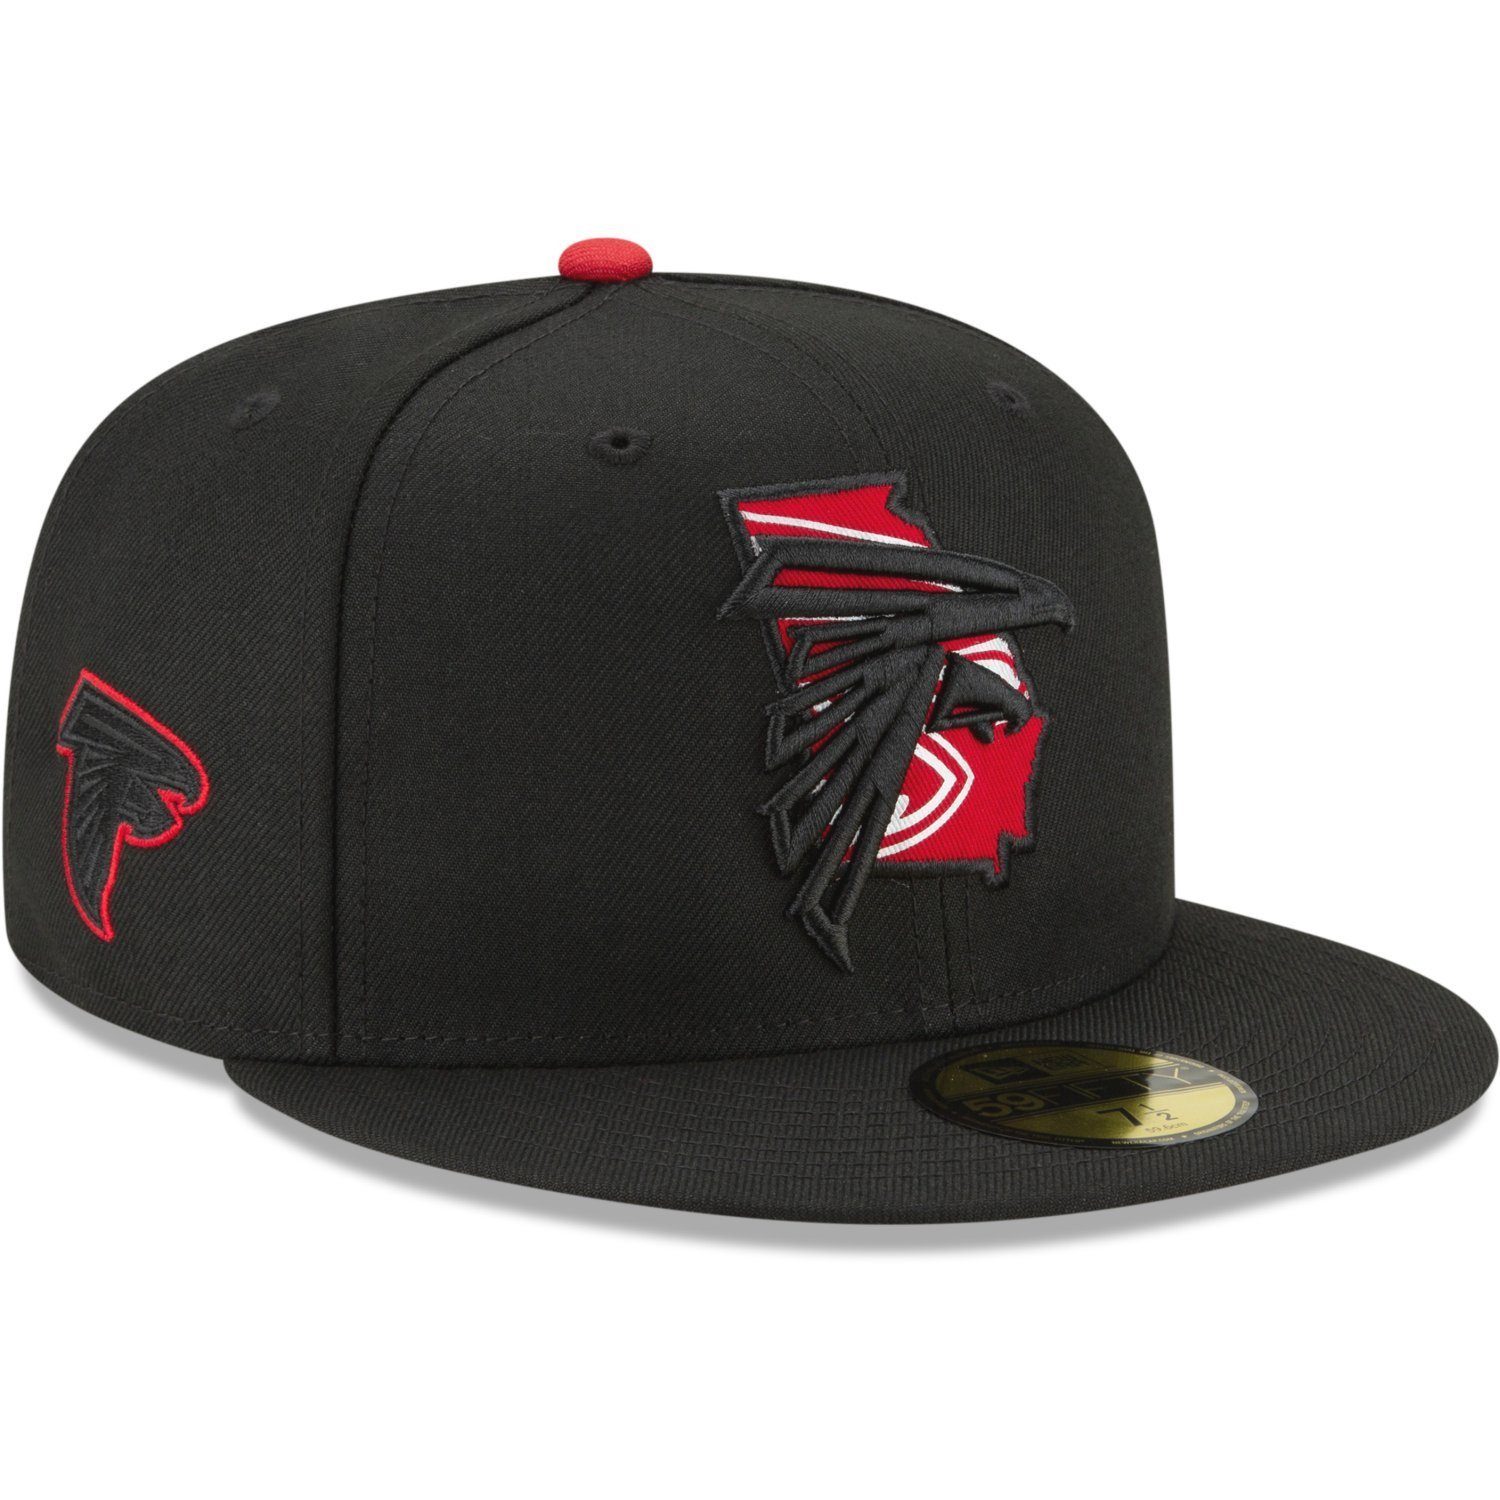 New Era Fitted Cap 59Fifty STATE LOGO NFL Teams Atlanta Falcons